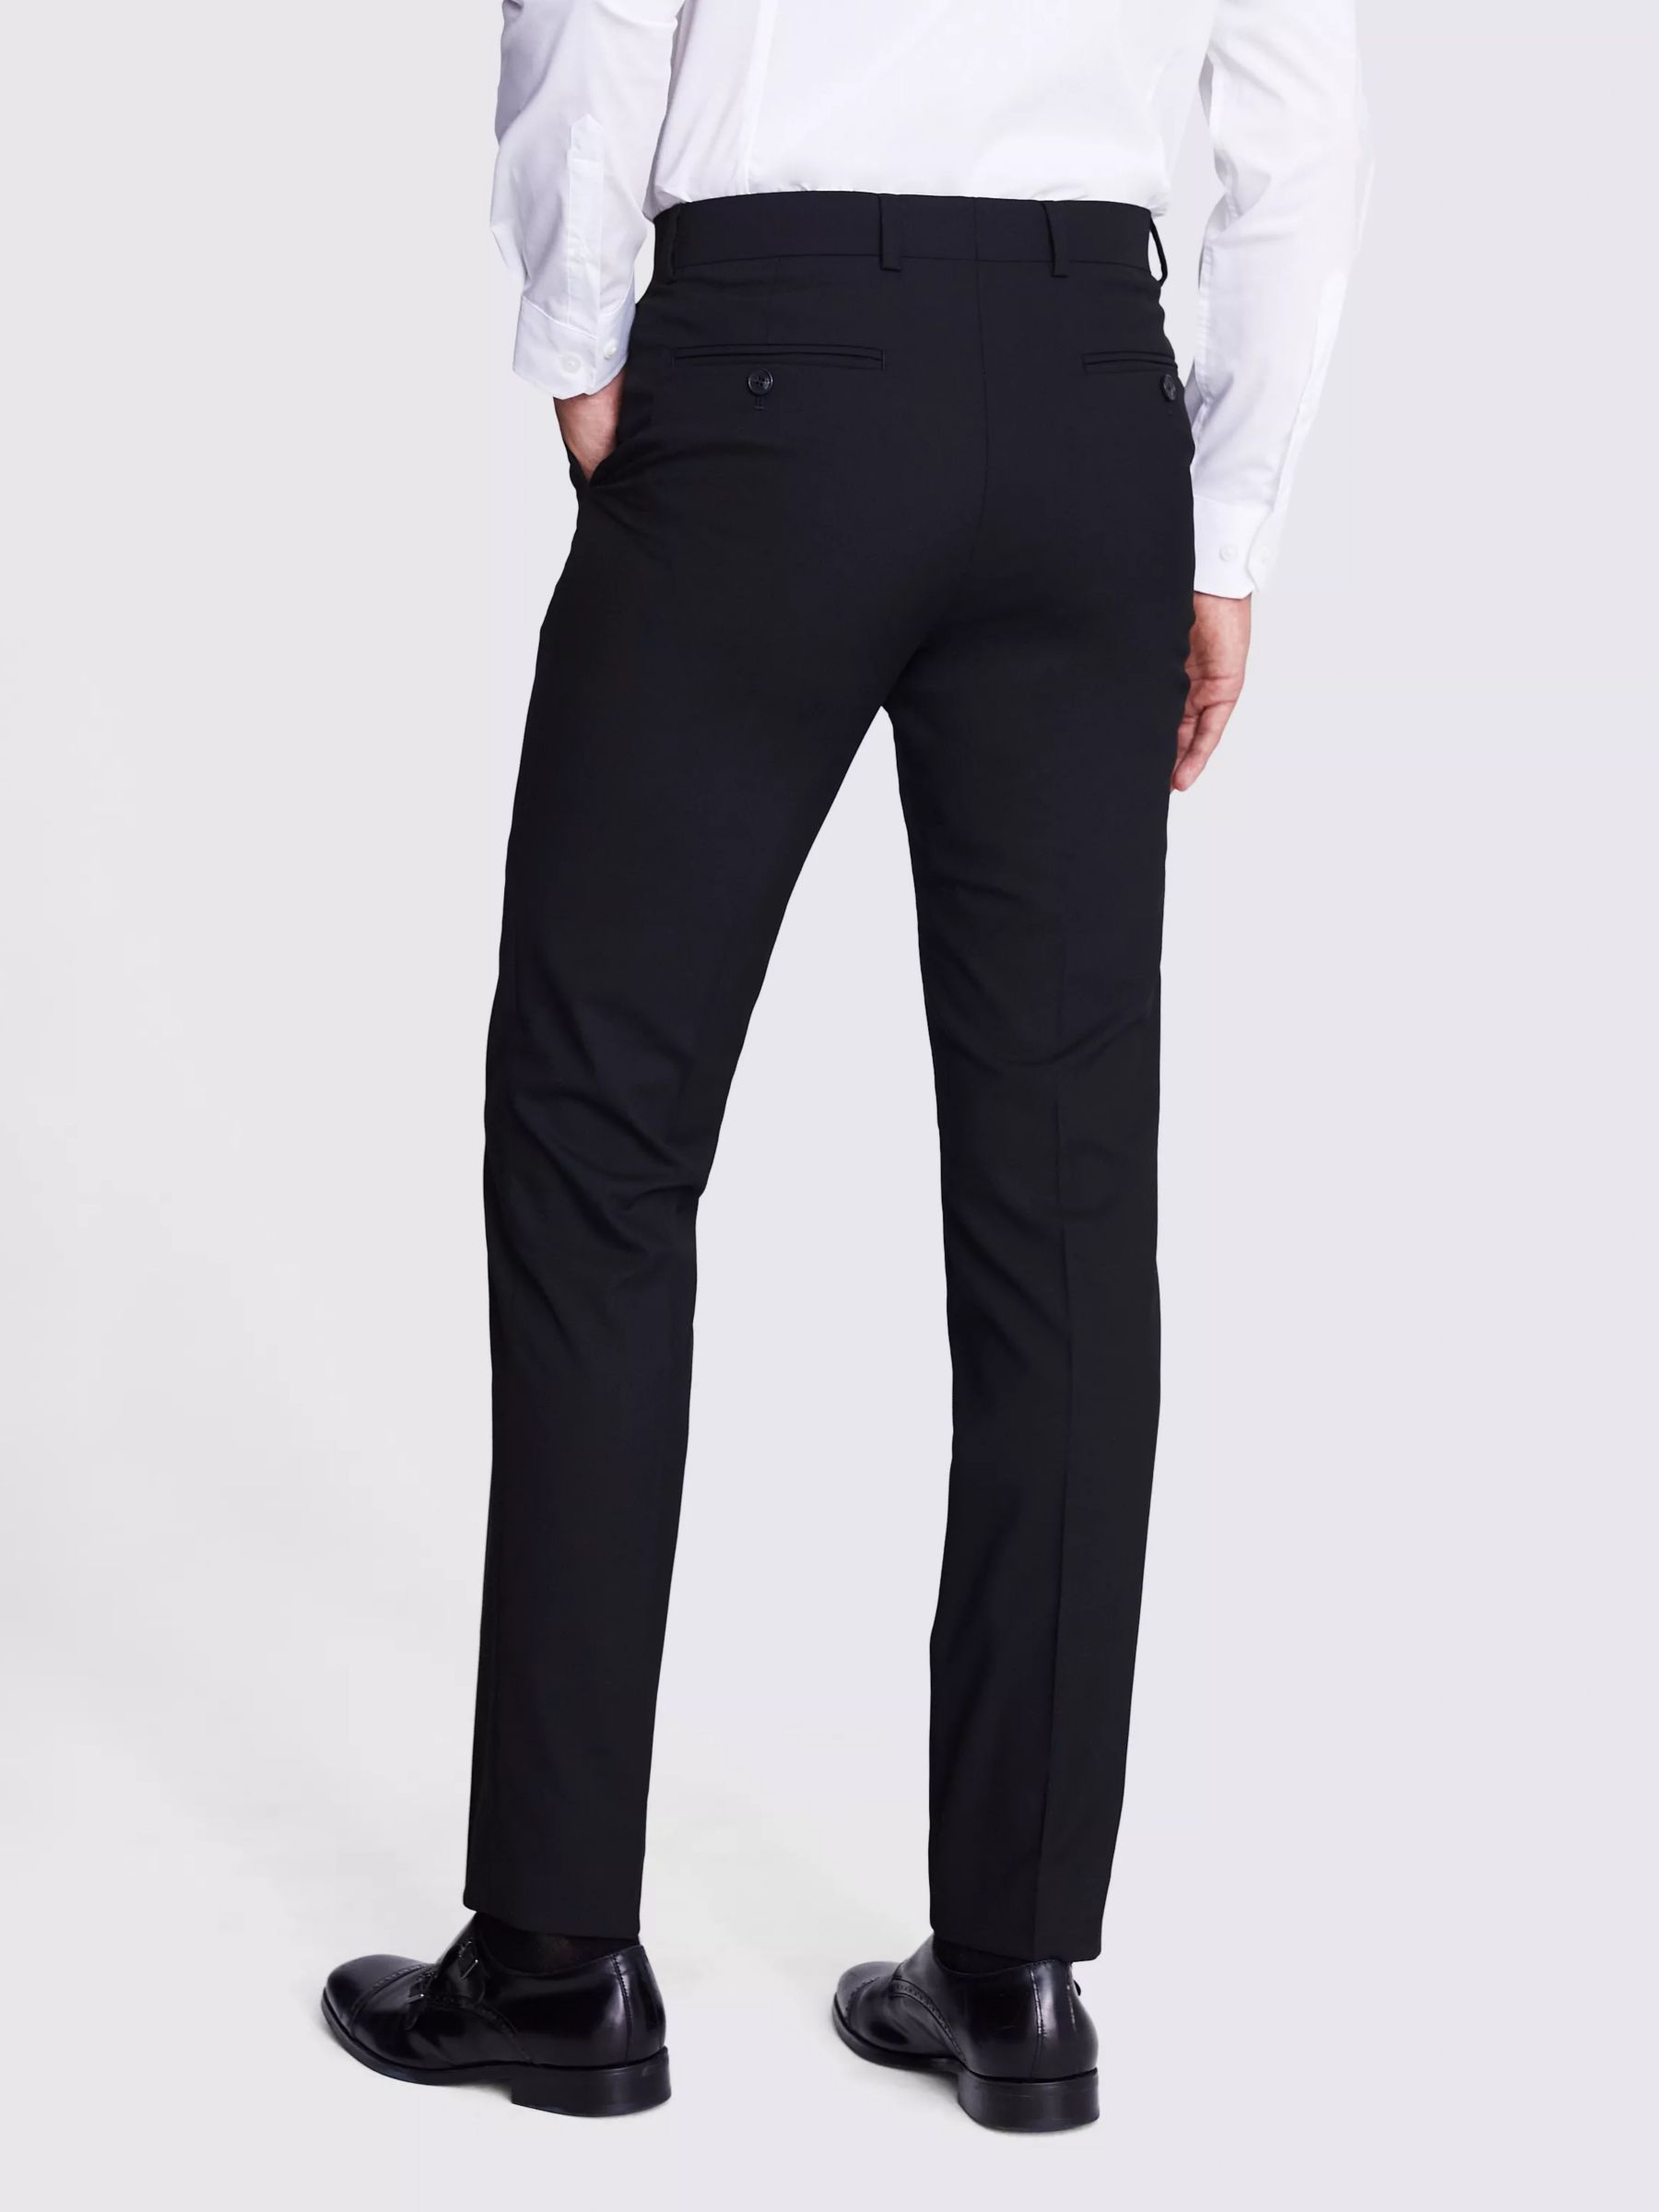 Moss Tailored Fit Trousers, Black, 30S